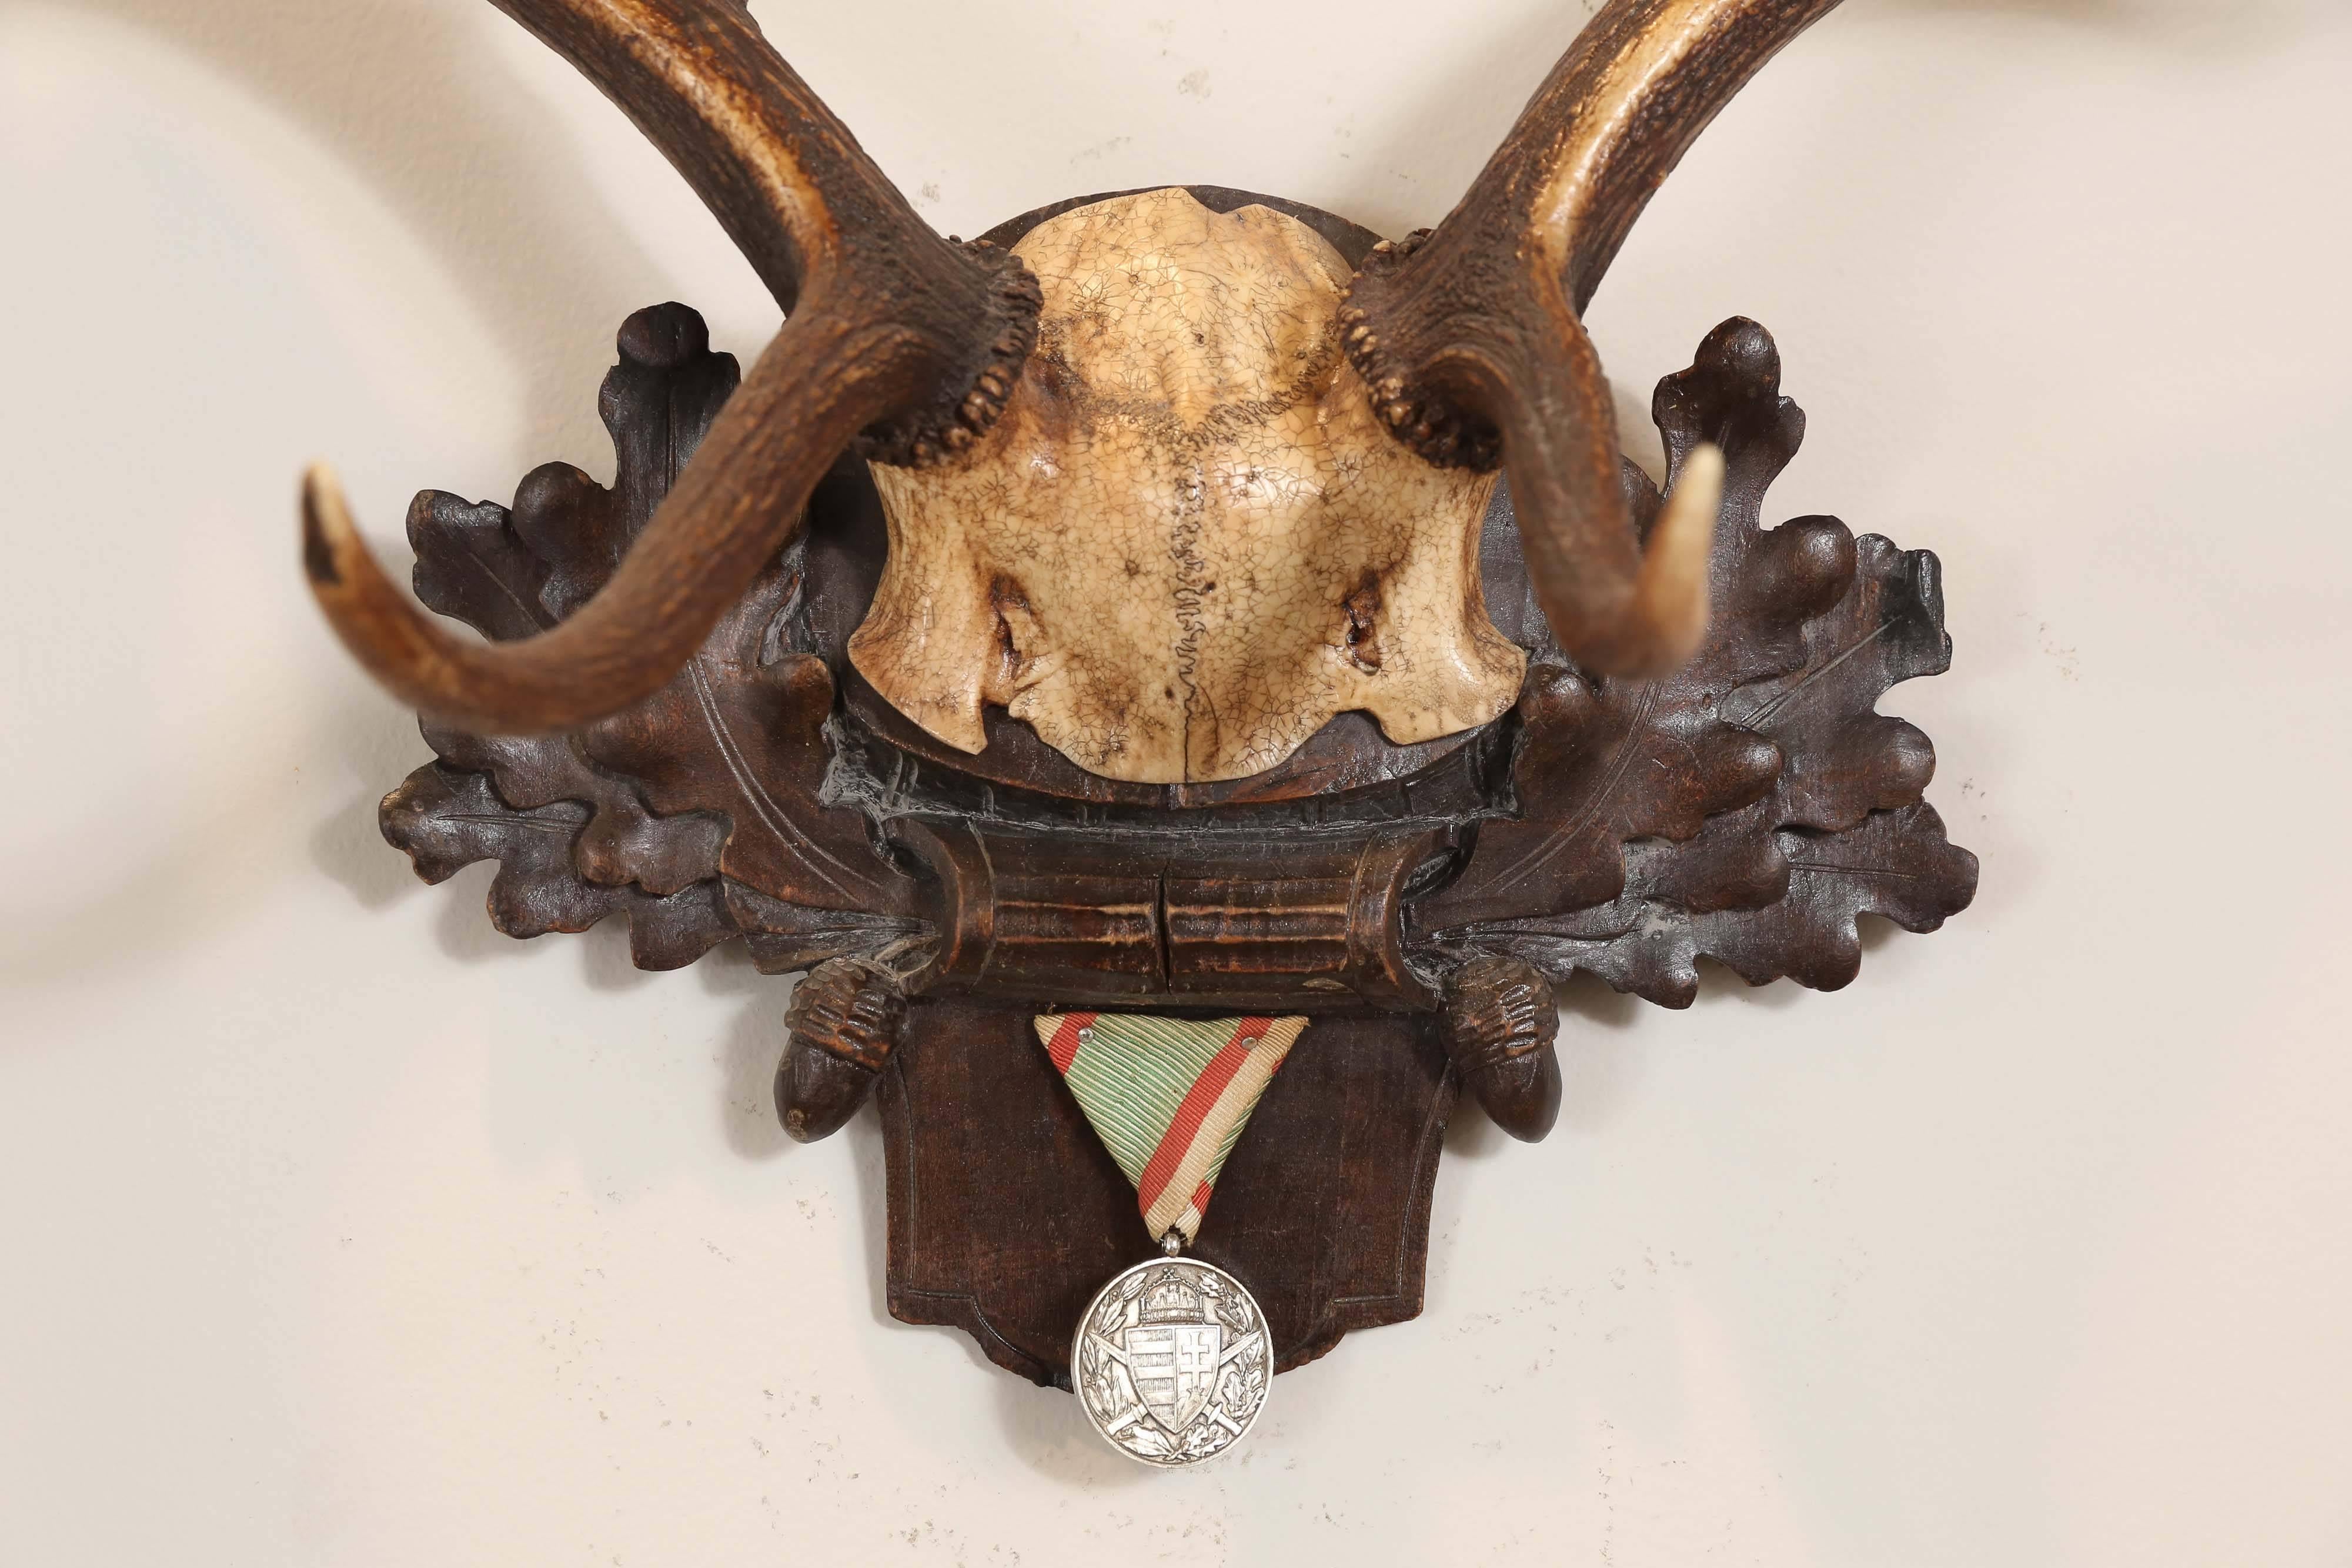 19th century fallow deer trophy from Emperor Franz Joseph's castle at Eckartsau in the Southern Austrian Alps, a favorite hunting schloss of the Habsburg Royal family. This historic hunting trophy features the original Black Forest carved plaque and